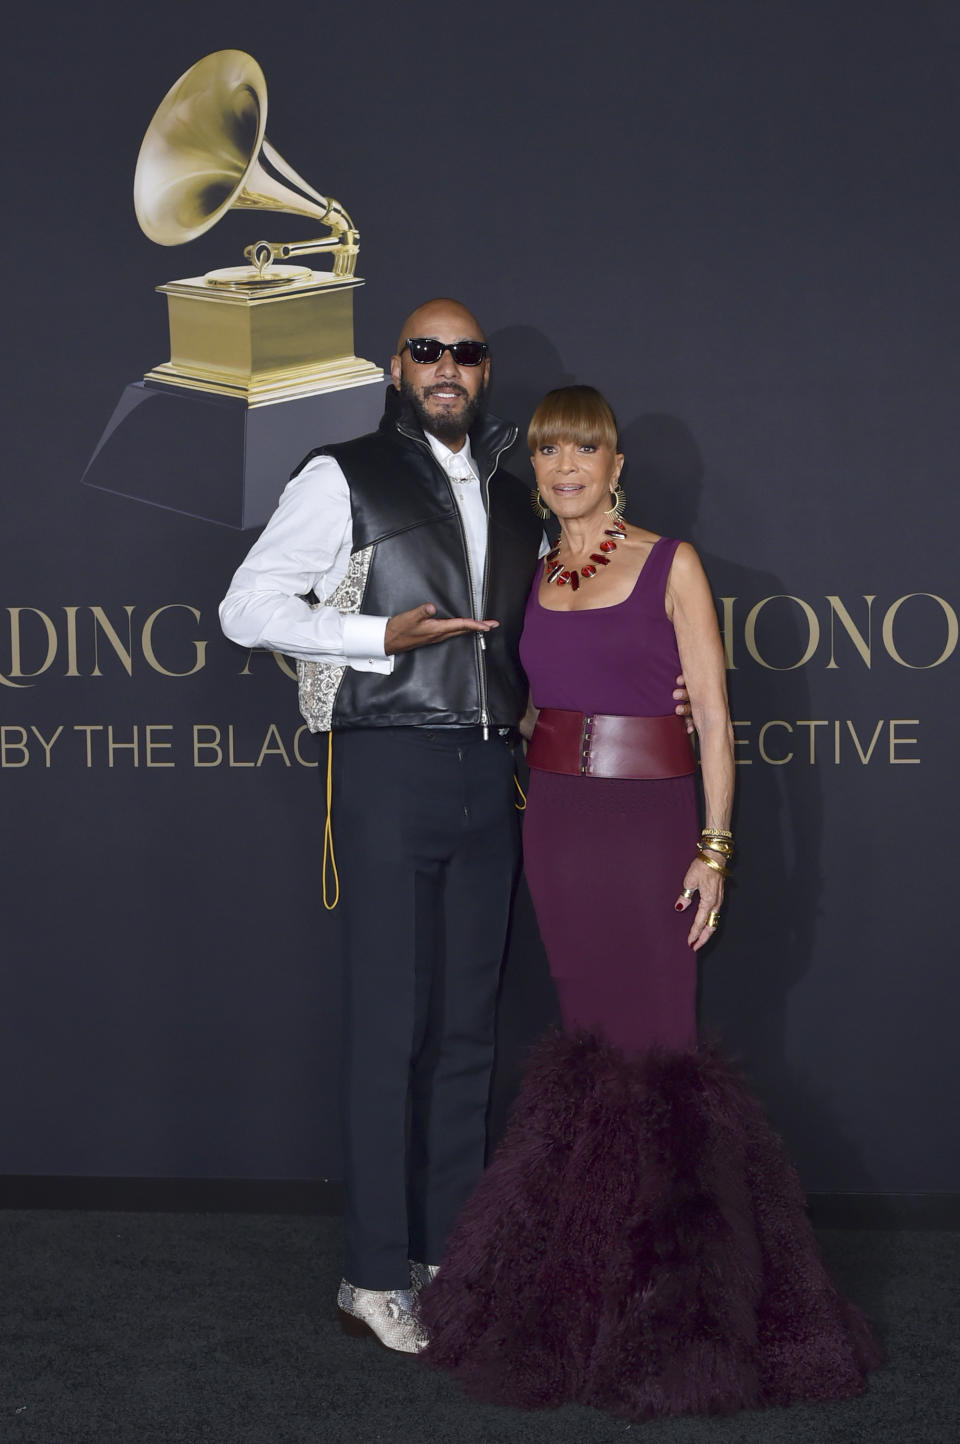 Swizz Beatz, left, and Epic Records CEO Sylvia Rhone arrive at the Black Music Collective on Thursday, Feb. 2, 2023, at The Hollywood Palladium in Los Angeles. (Photo by Richard Shotwell/Invision/AP)